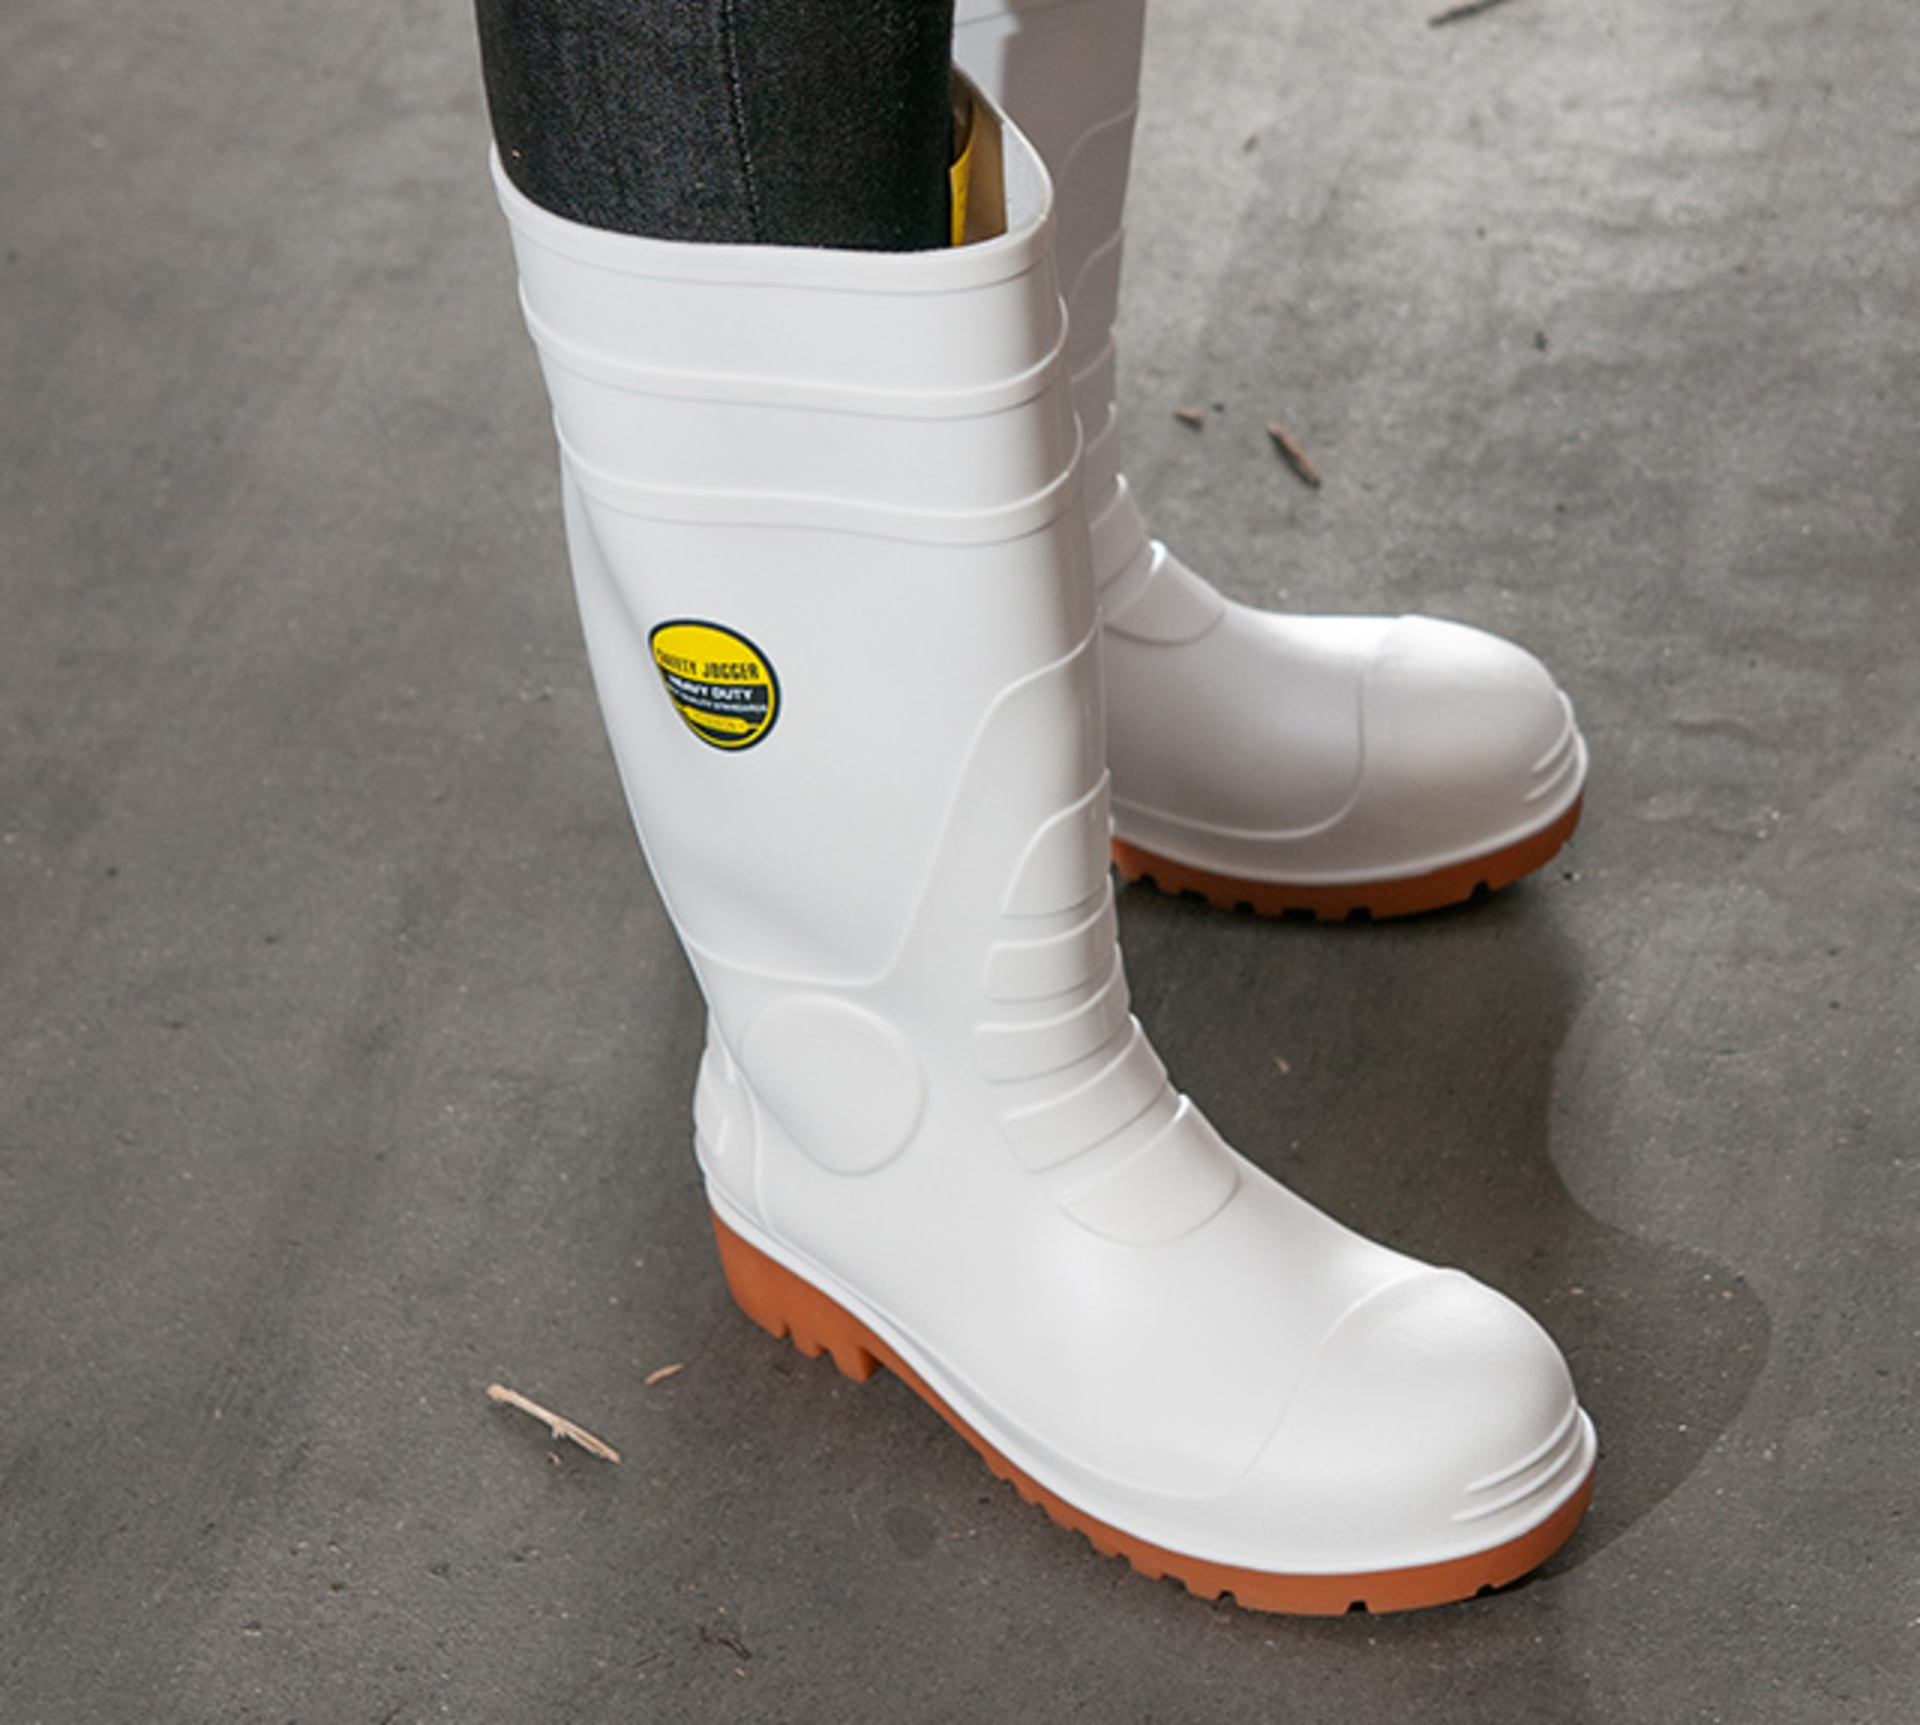 Safety Jogger Hercules Wellington Boot for Construction and Manufacturing 